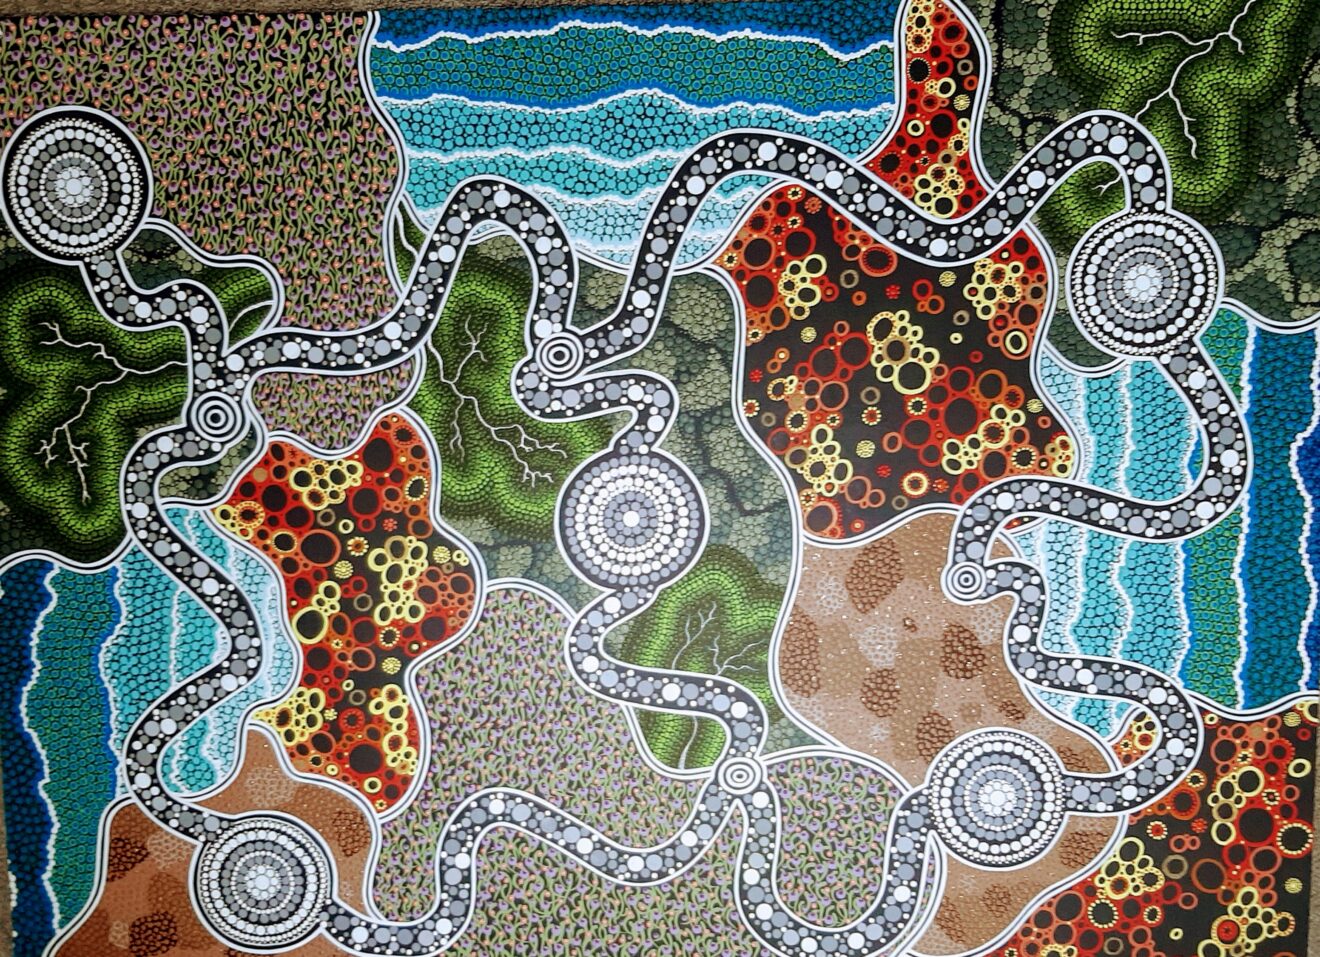 Colourful aboriginal artwork called Our land reflects our people showing grey dotted paths snaking throughout the image with segmented backgrounds in red, orange & yellow; greens and blues.